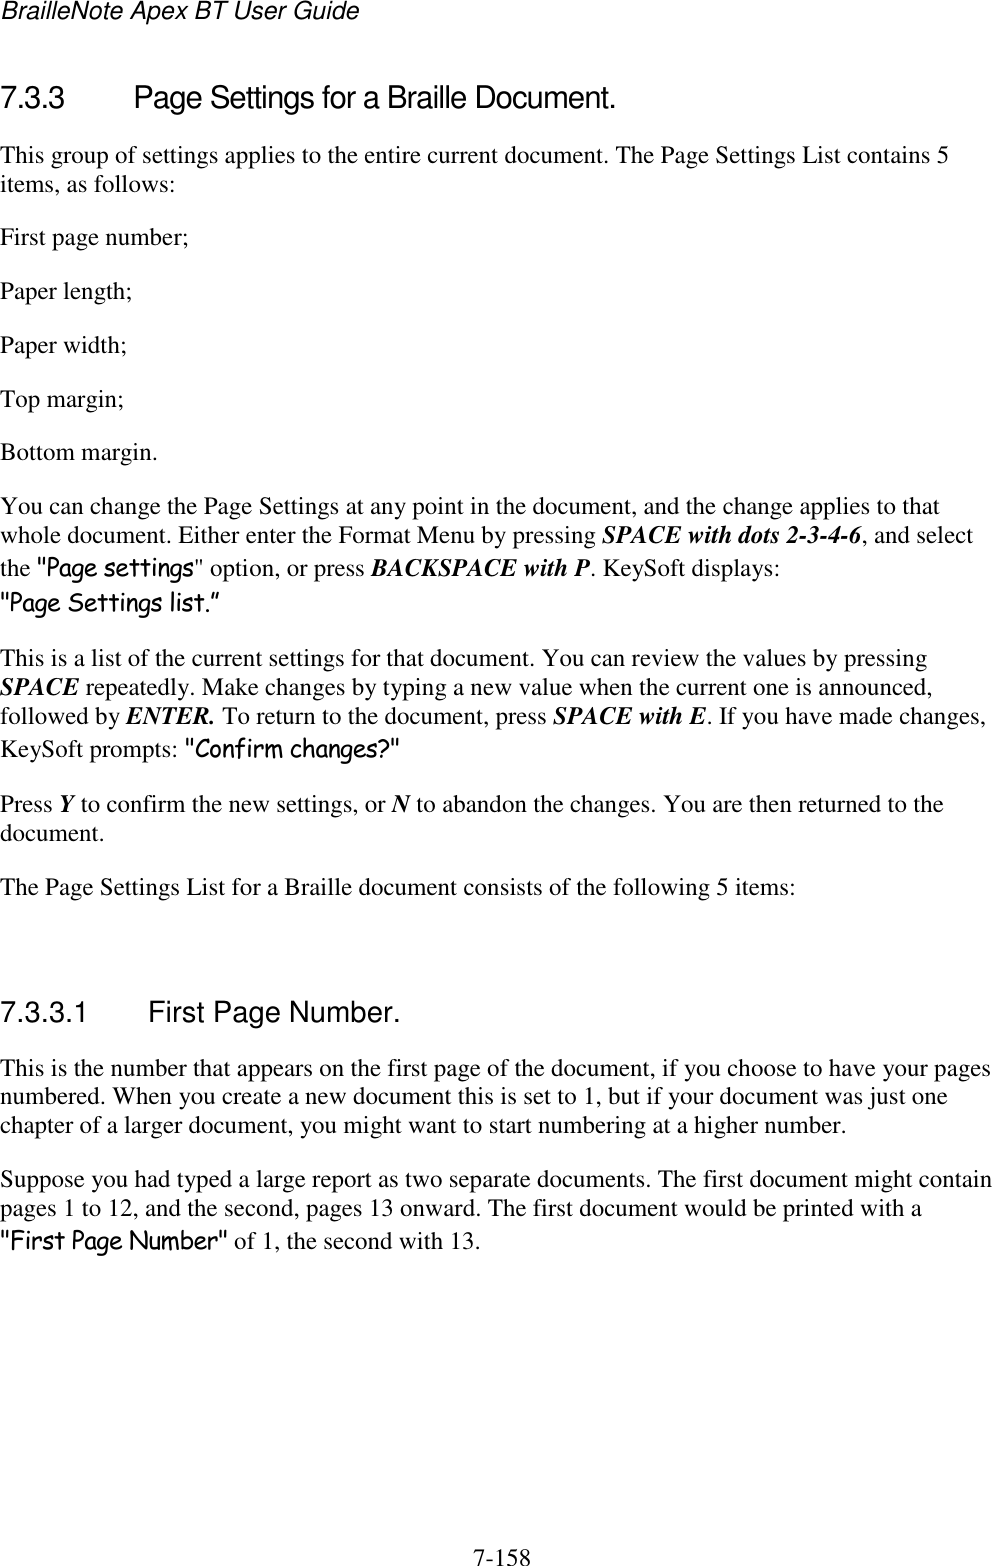 BrailleNote Apex BT User Guide   7-158   7.3.3  Page Settings for a Braille Document. This group of settings applies to the entire current document. The Page Settings List contains 5 items, as follows: First page number; Paper length; Paper width; Top margin; Bottom margin. You can change the Page Settings at any point in the document, and the change applies to that whole document. Either enter the Format Menu by pressing SPACE with dots 2-3-4-6, and select the &quot;Page settings&quot; option, or press BACKSPACE with P. KeySoft displays: &quot;Page Settings list.” This is a list of the current settings for that document. You can review the values by pressing SPACE repeatedly. Make changes by typing a new value when the current one is announced, followed by ENTER. To return to the document, press SPACE with E. If you have made changes, KeySoft prompts: &quot;Confirm changes?&quot; Press Y to confirm the new settings, or N to abandon the changes. You are then returned to the document. The Page Settings List for a Braille document consists of the following 5 items:   7.3.3.1  First Page Number. This is the number that appears on the first page of the document, if you choose to have your pages numbered. When you create a new document this is set to 1, but if your document was just one chapter of a larger document, you might want to start numbering at a higher number. Suppose you had typed a large report as two separate documents. The first document might contain pages 1 to 12, and the second, pages 13 onward. The first document would be printed with a &quot;First Page Number&quot; of 1, the second with 13.   